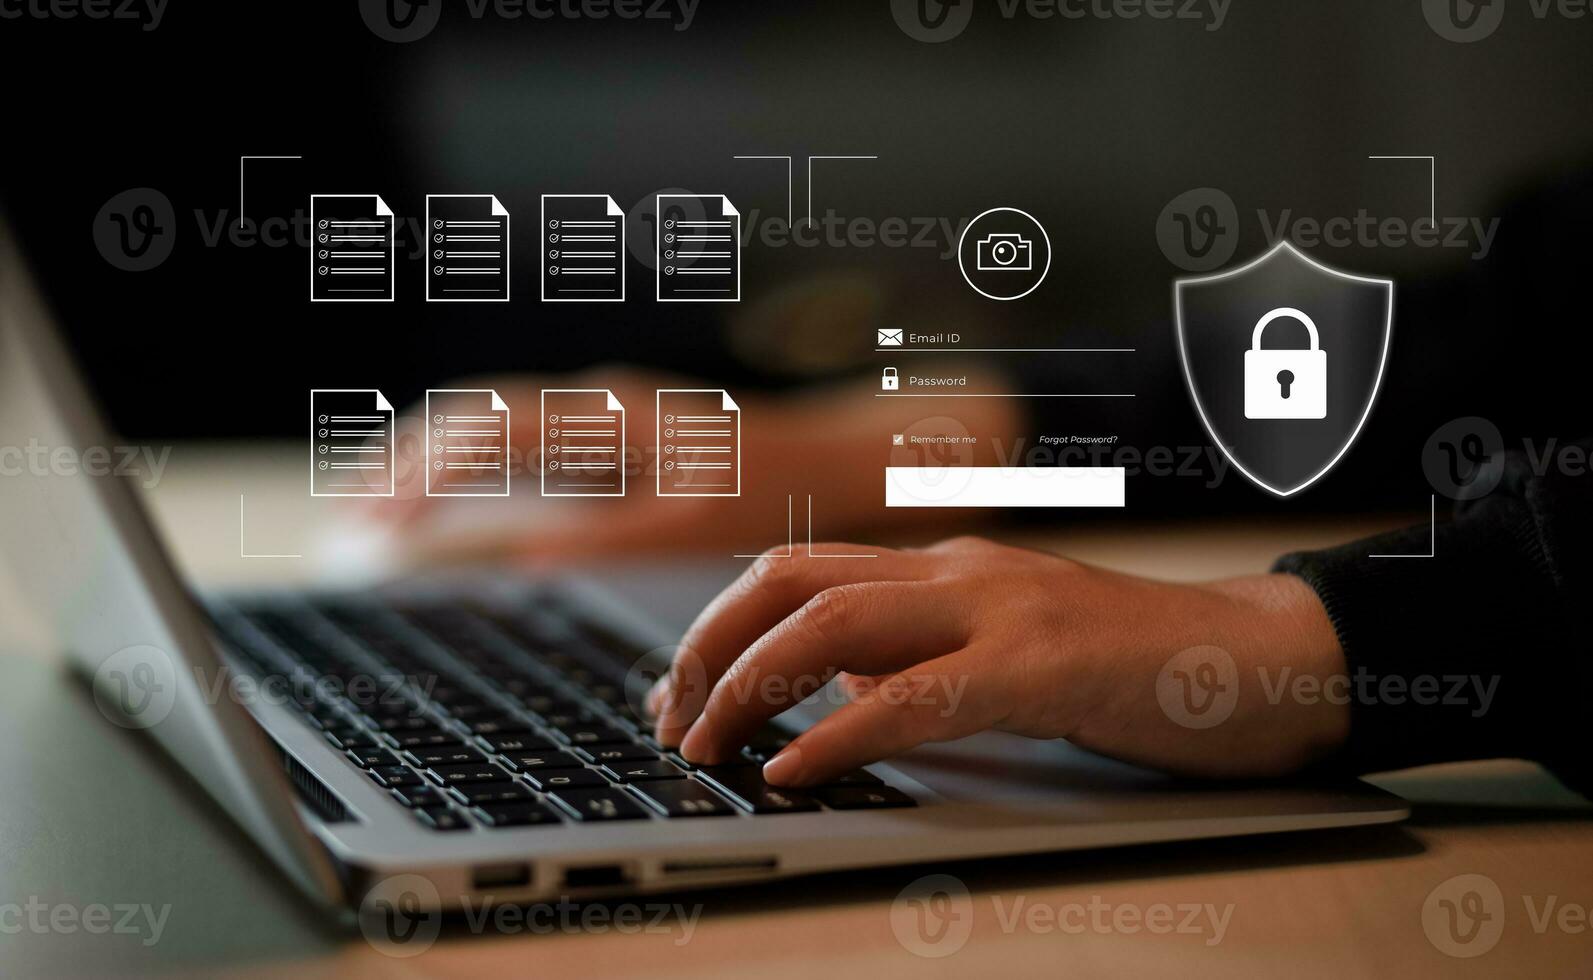 Cyber security and Security password login online concept  Hands typing and entering username and password of social media, log in with smartphone to an online bank account, data protection hacker photo